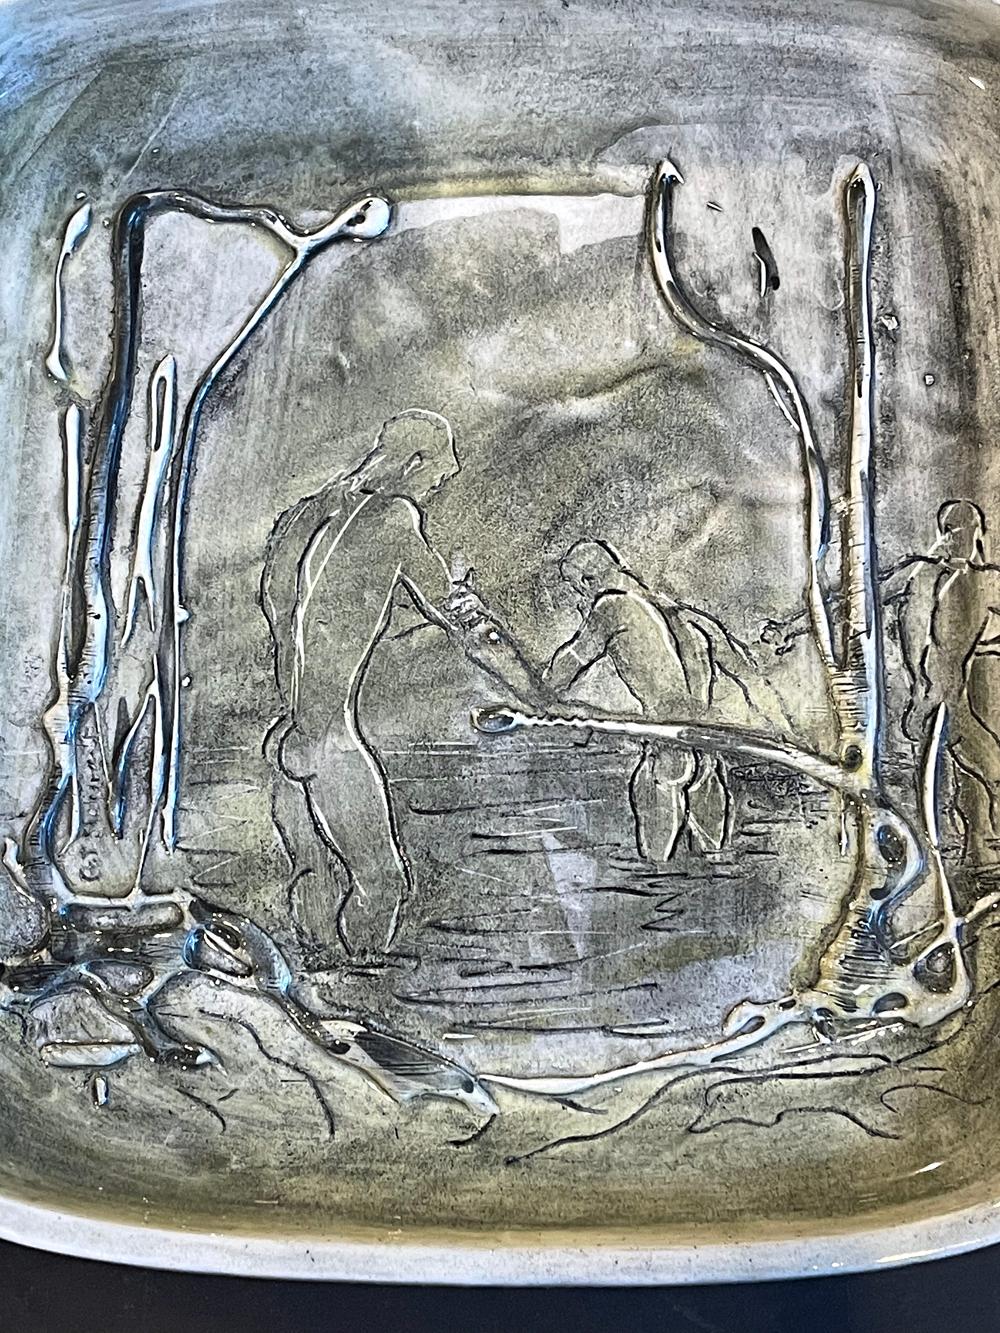 An especially rare example of Pat and Covey Stewart's ceramic work in Laguna Beach, California, this dish depicts a group of three nude male figures bathing in a marshy area along the California coast. Here, Pat Stewart used a squeeze bag technique